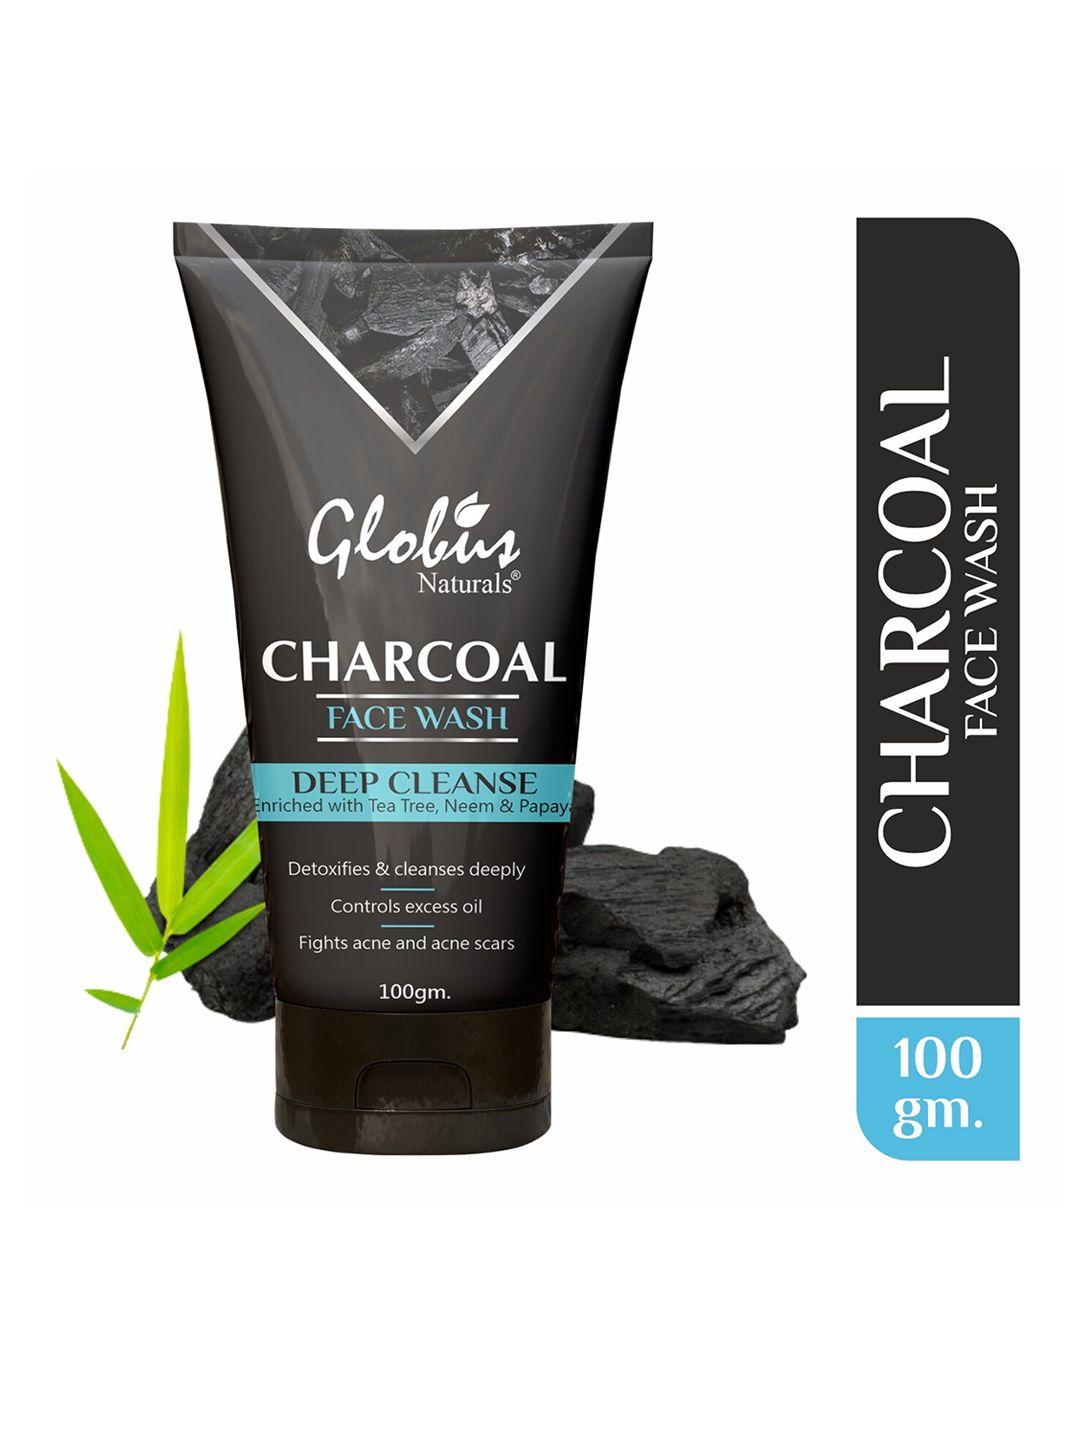 globus naturals deep cleanse charcoal face wash with tea tree & neem 100 g